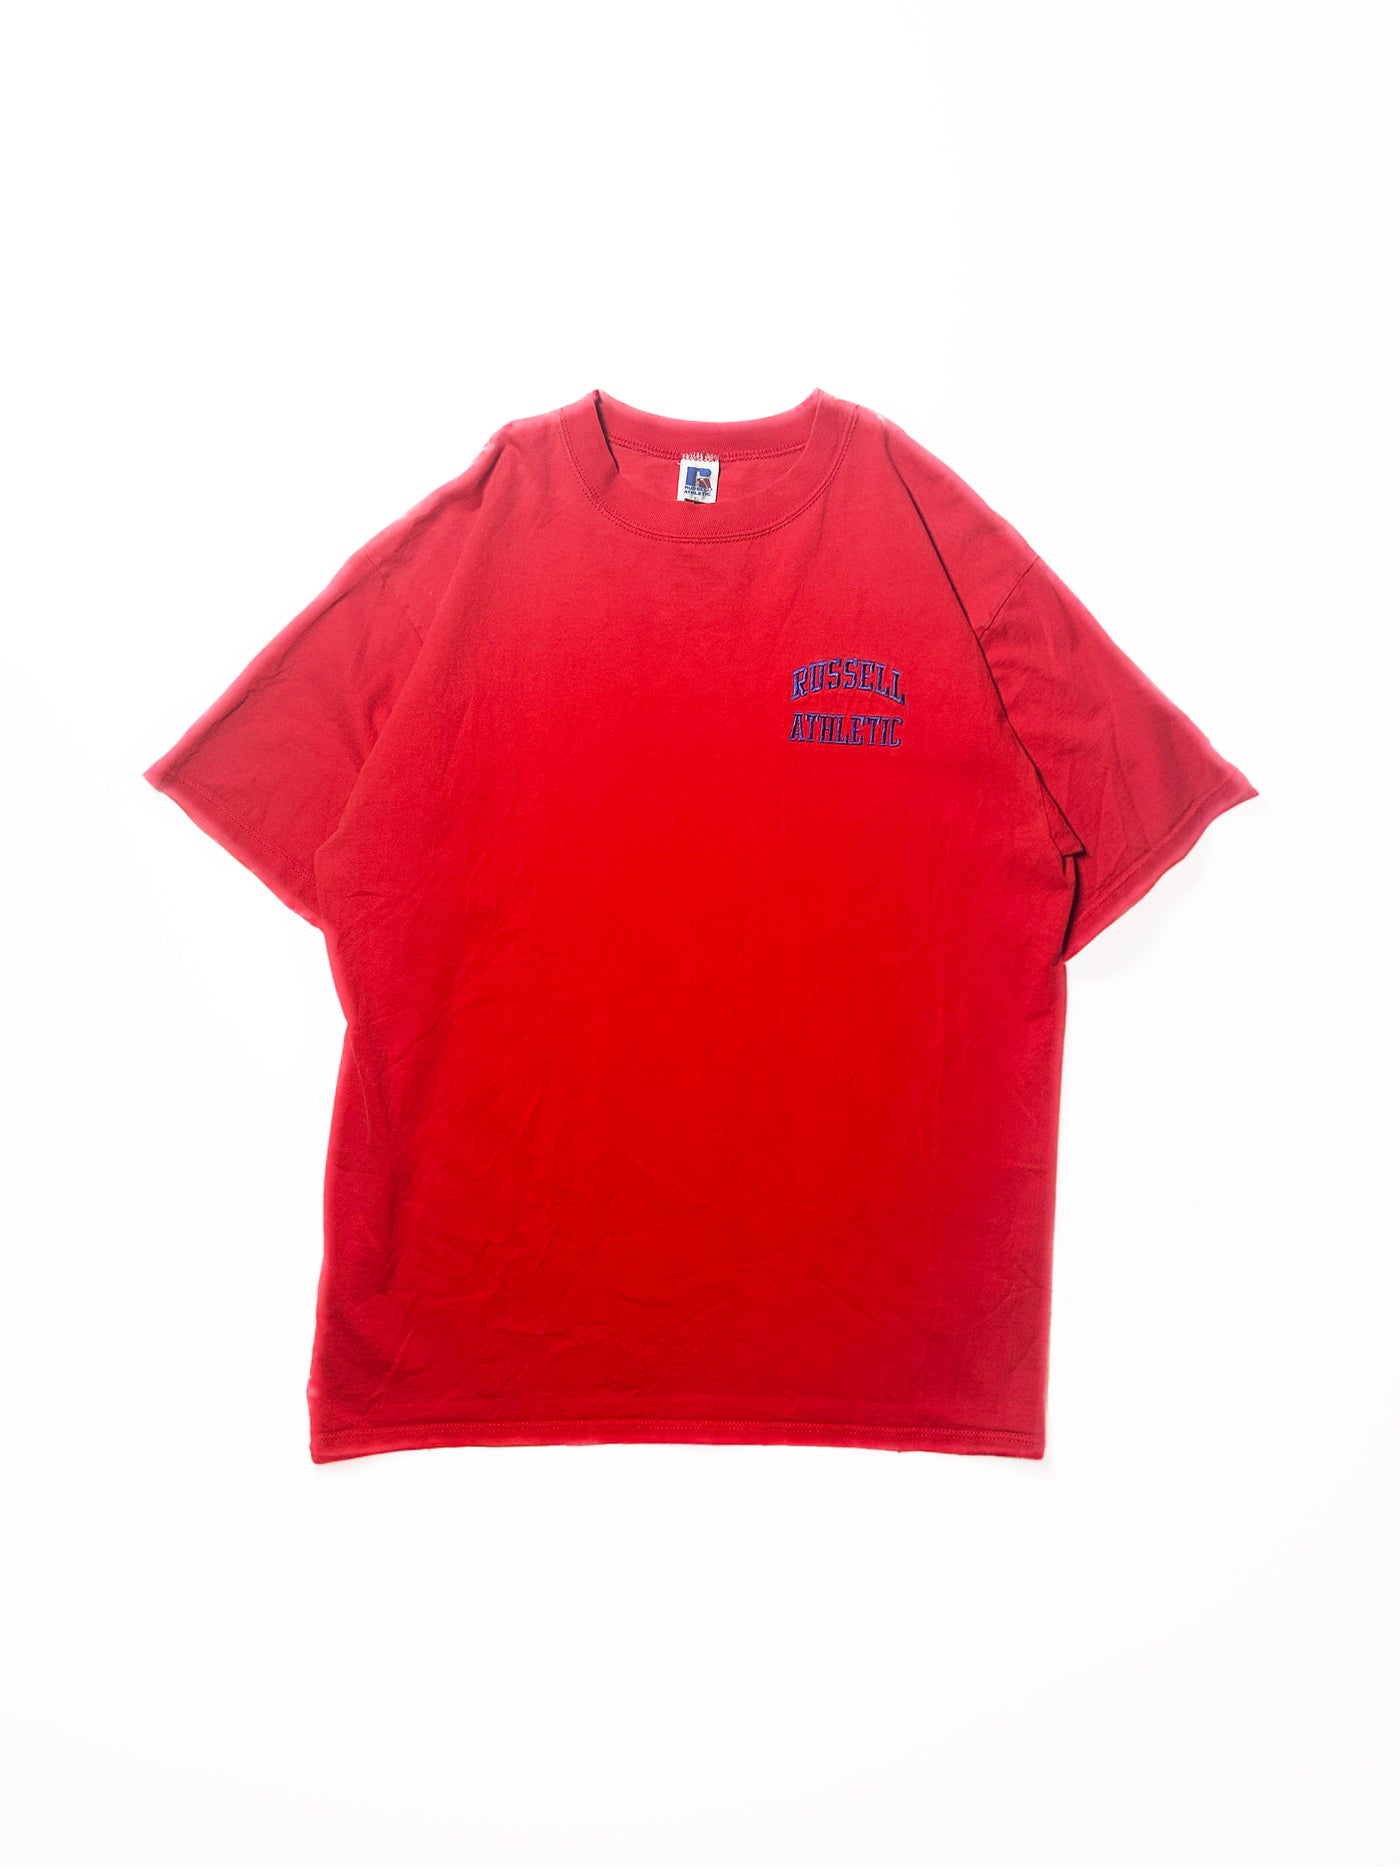 Vintage 90s Russell Athletic Embroidered T-Shirt